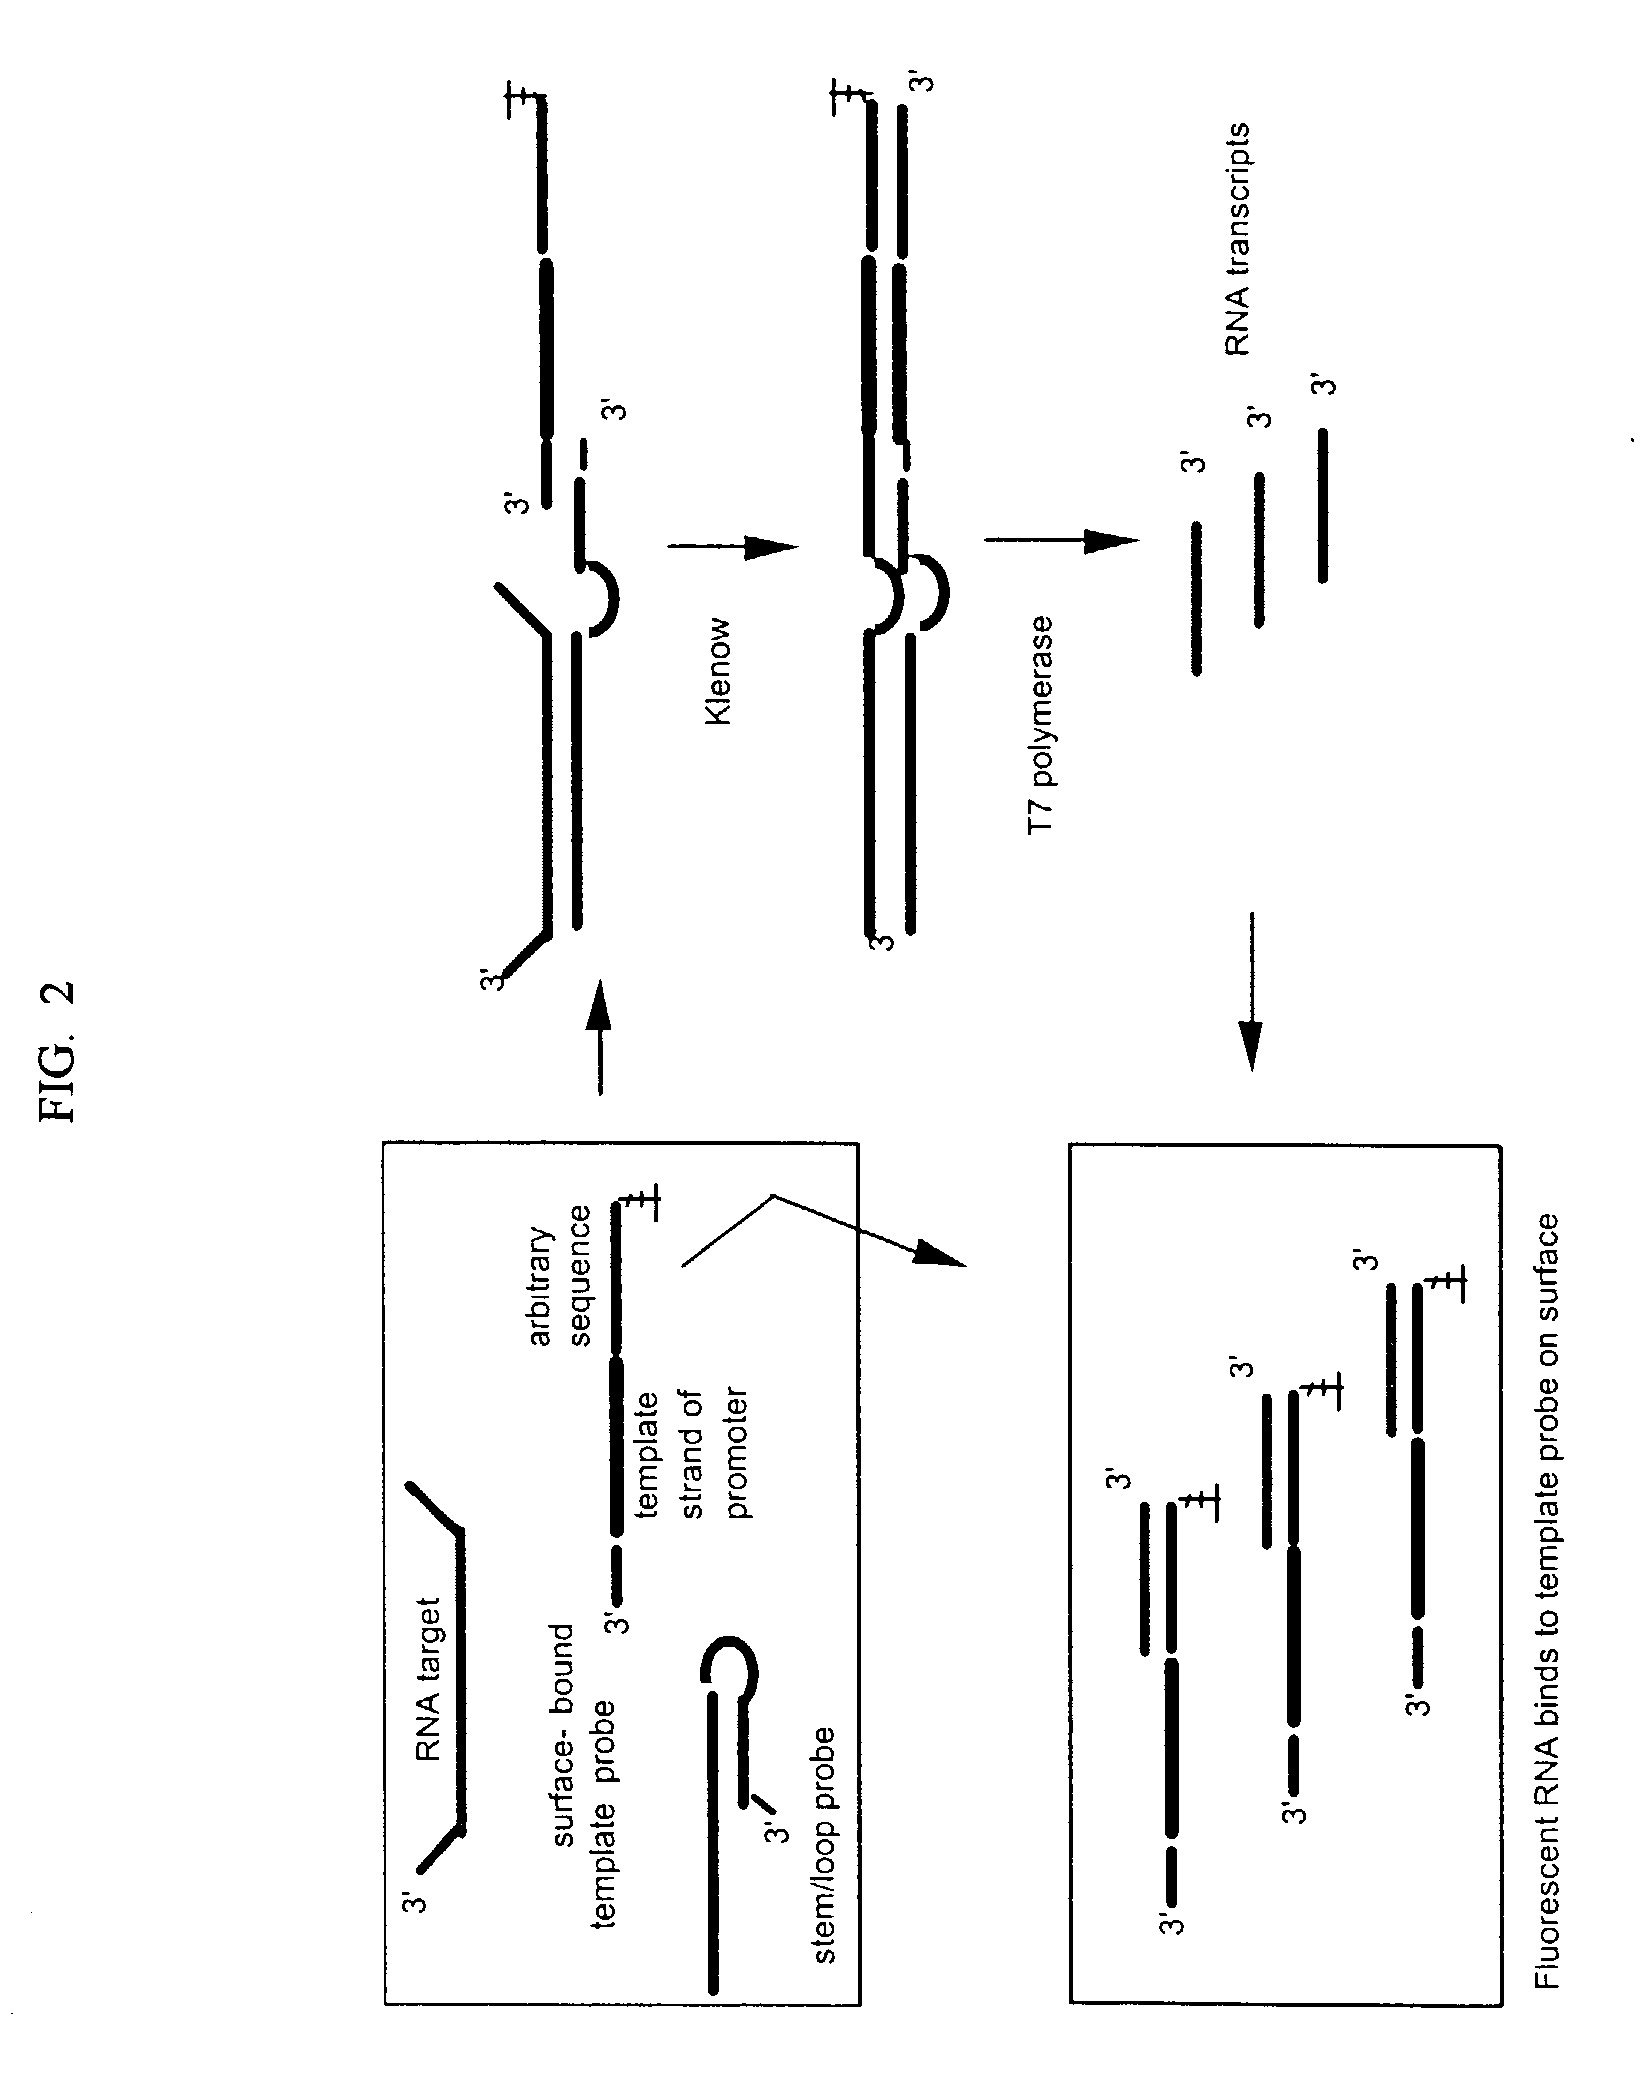 Isothermal amplification in nucleic acid analysis